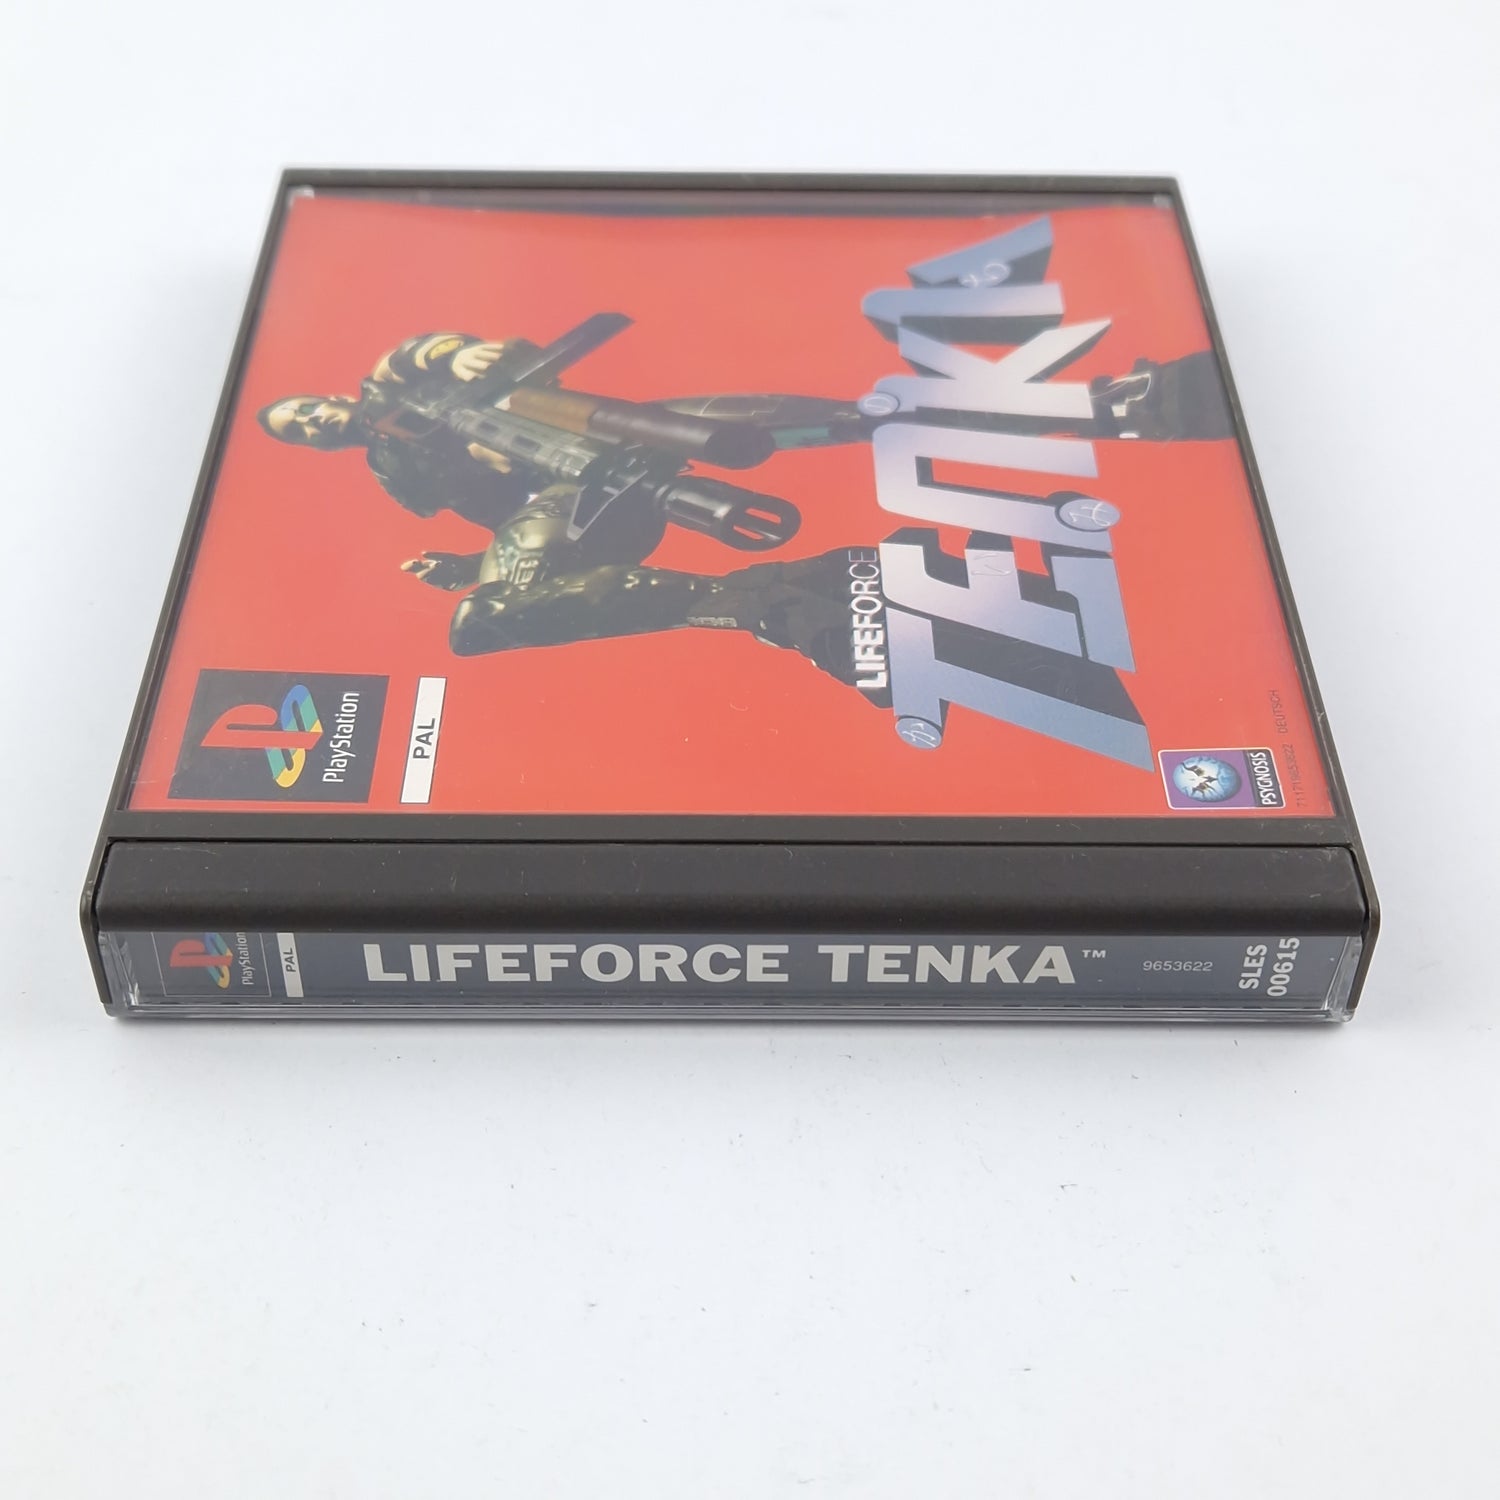 Playstation 1 game: Lifeforce Tenka - OVP instructions CD / SONY PS1 PSX PAL